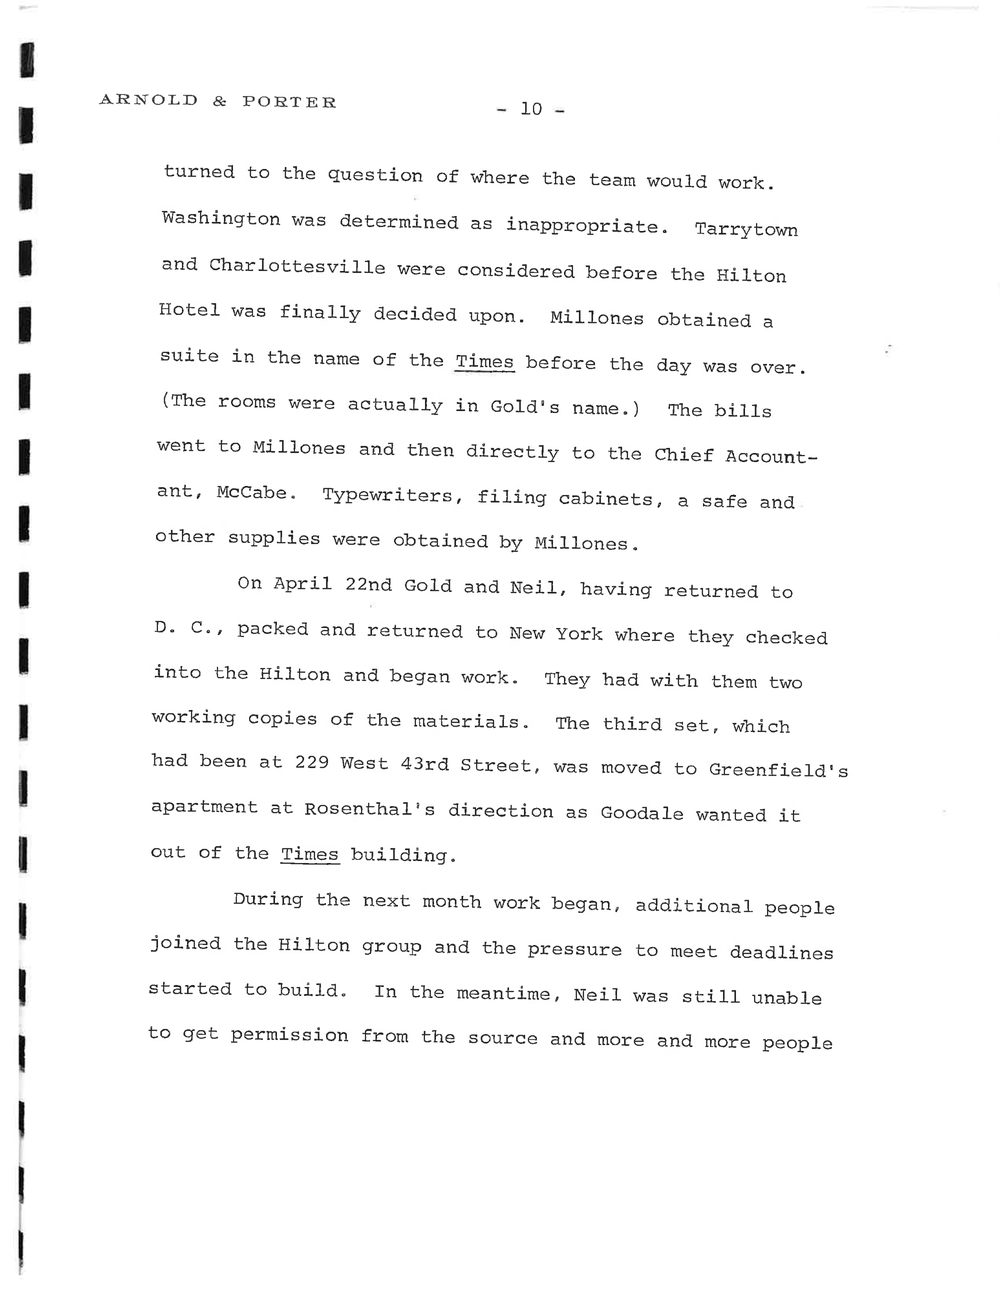 Page 10 from Rogovin Sheehan memo